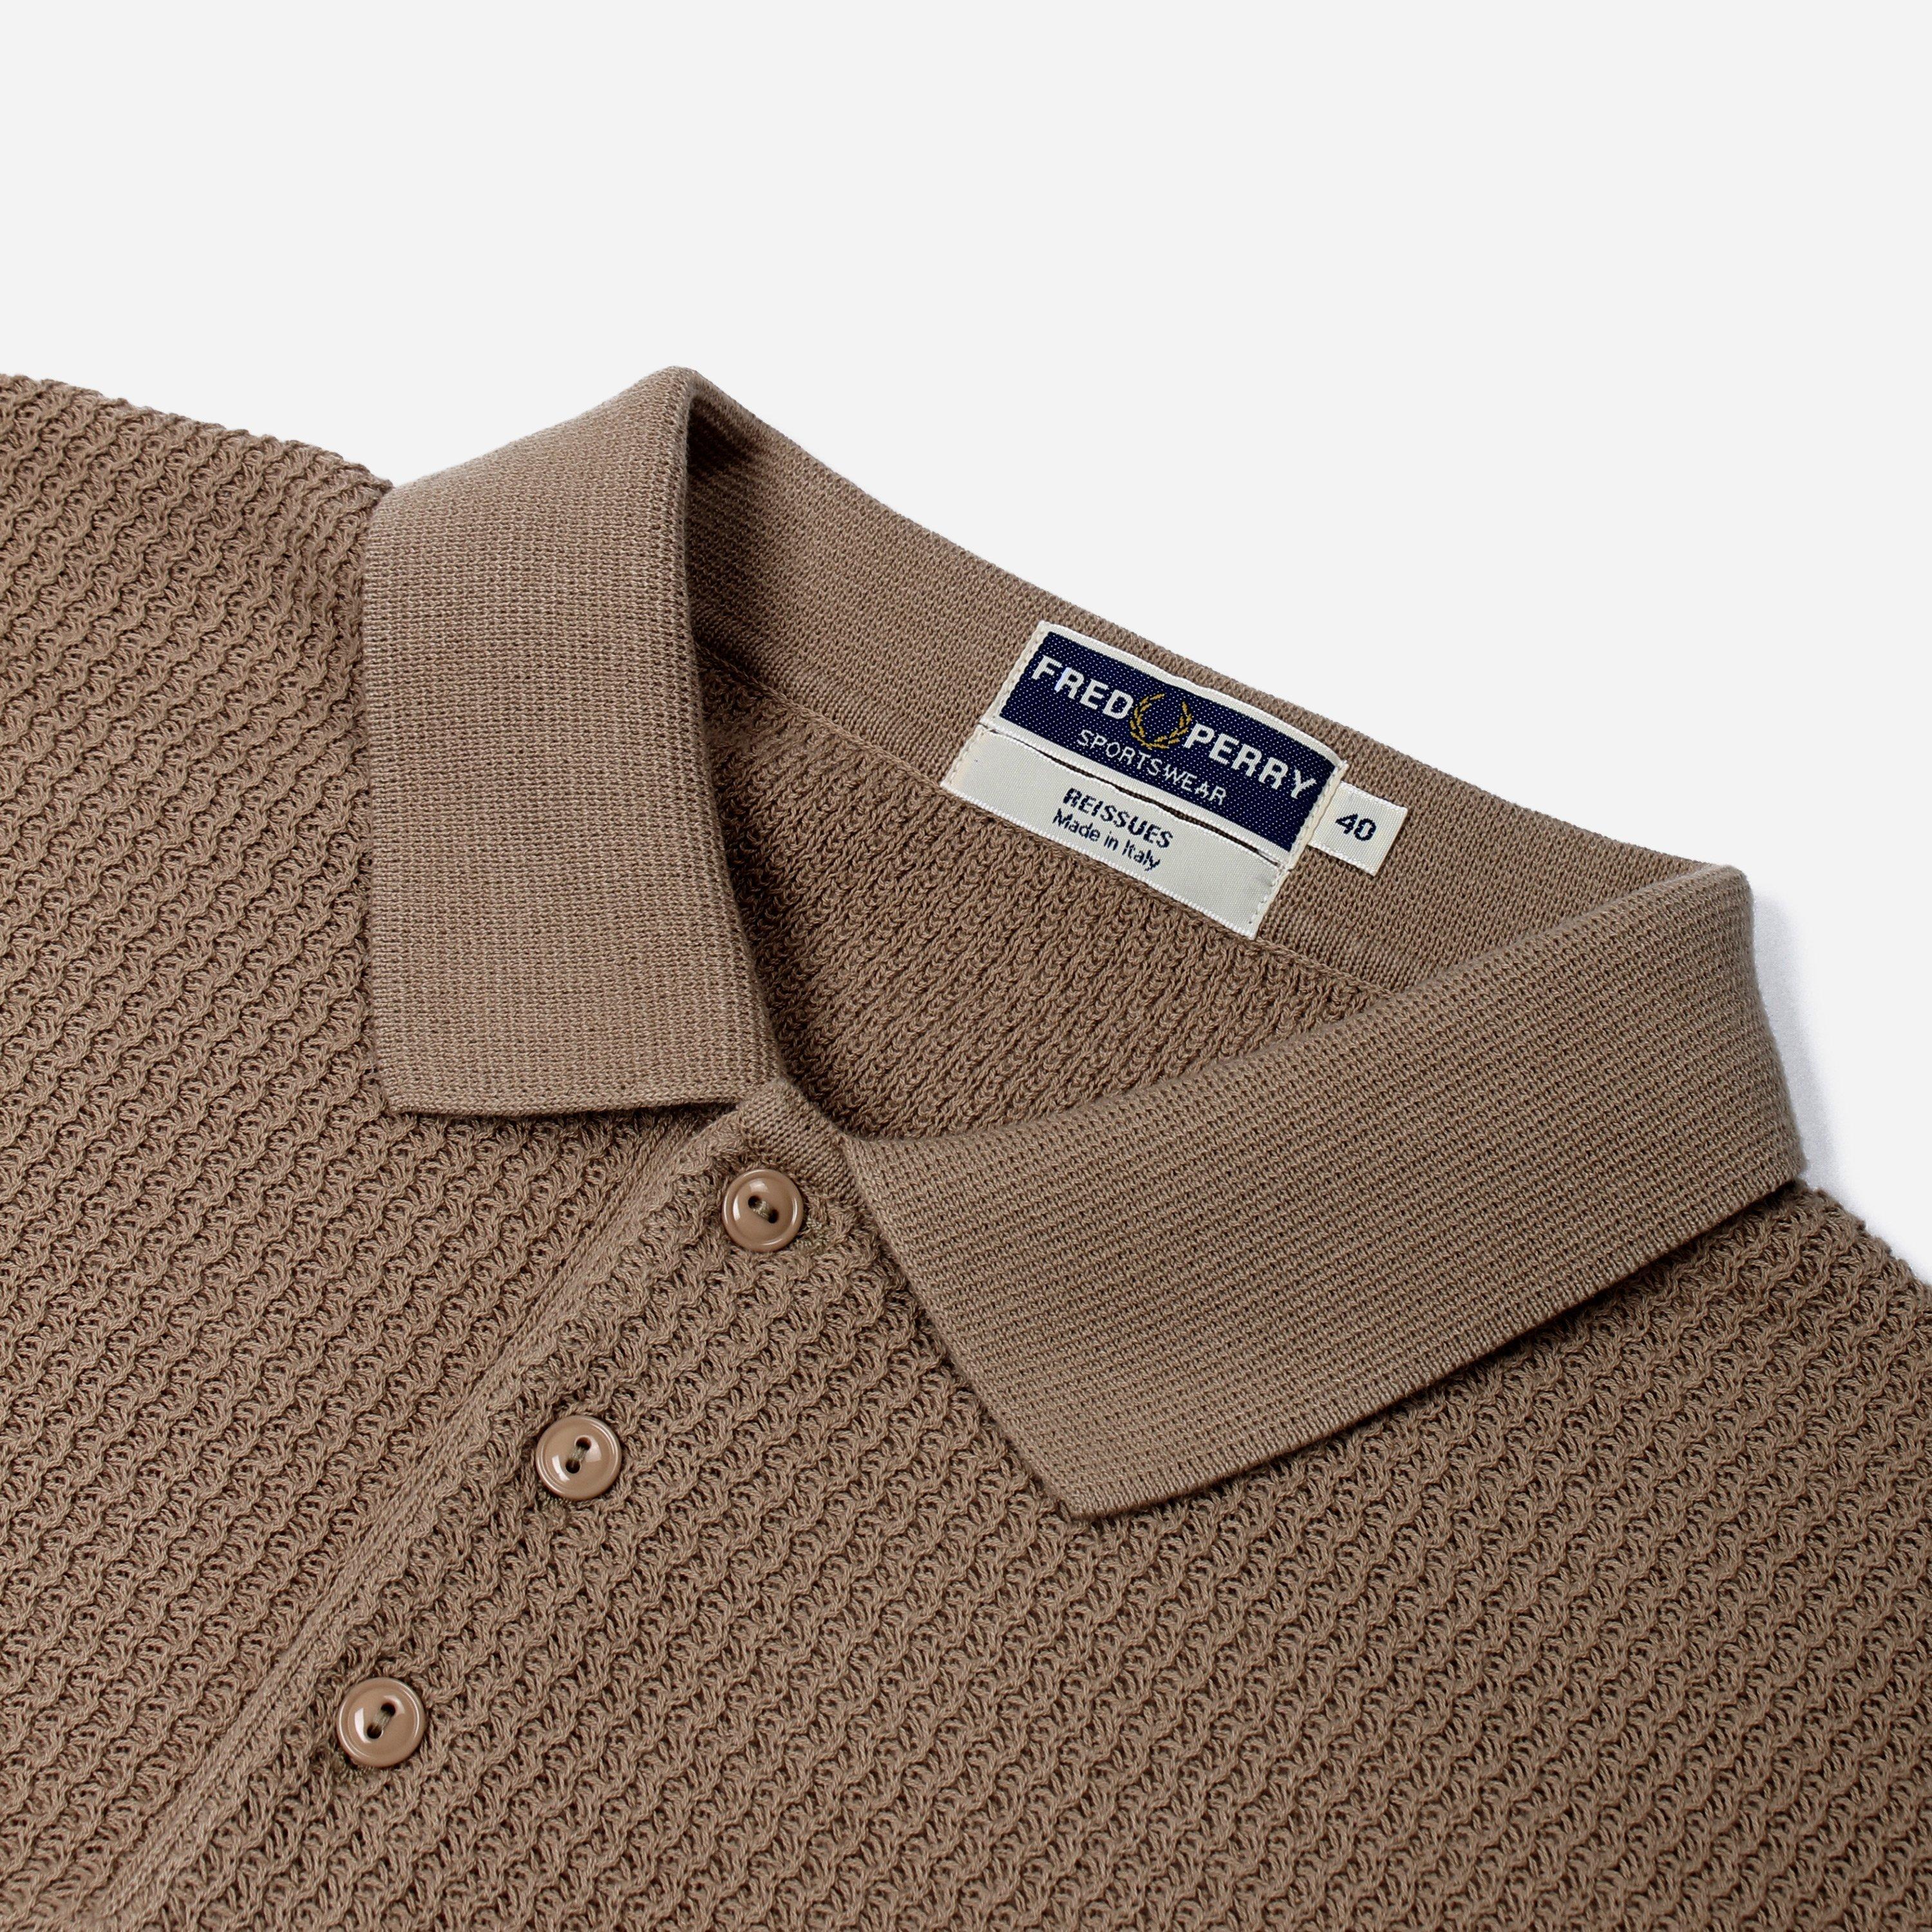 Fred Perry Raglan Knitted Polo Shirt in Brown for Men - Lyst